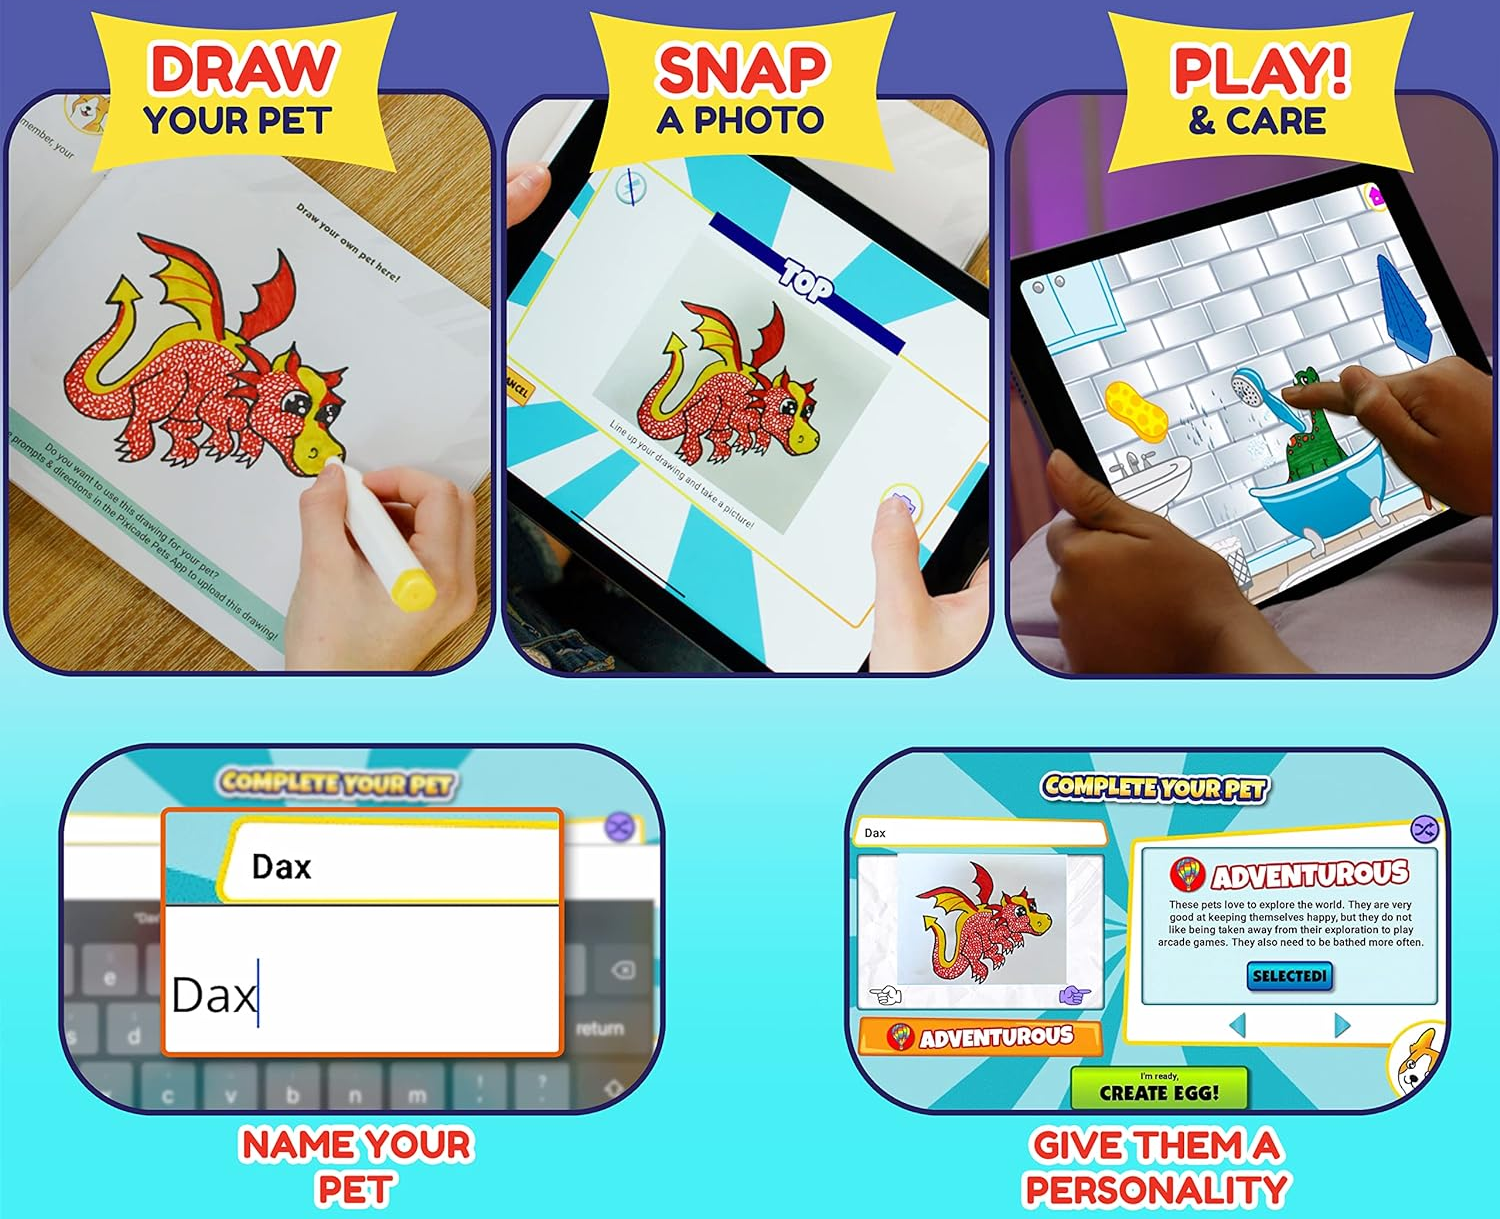 a child drawing a dragon pet, taking a photo of it, then playing with it in the app